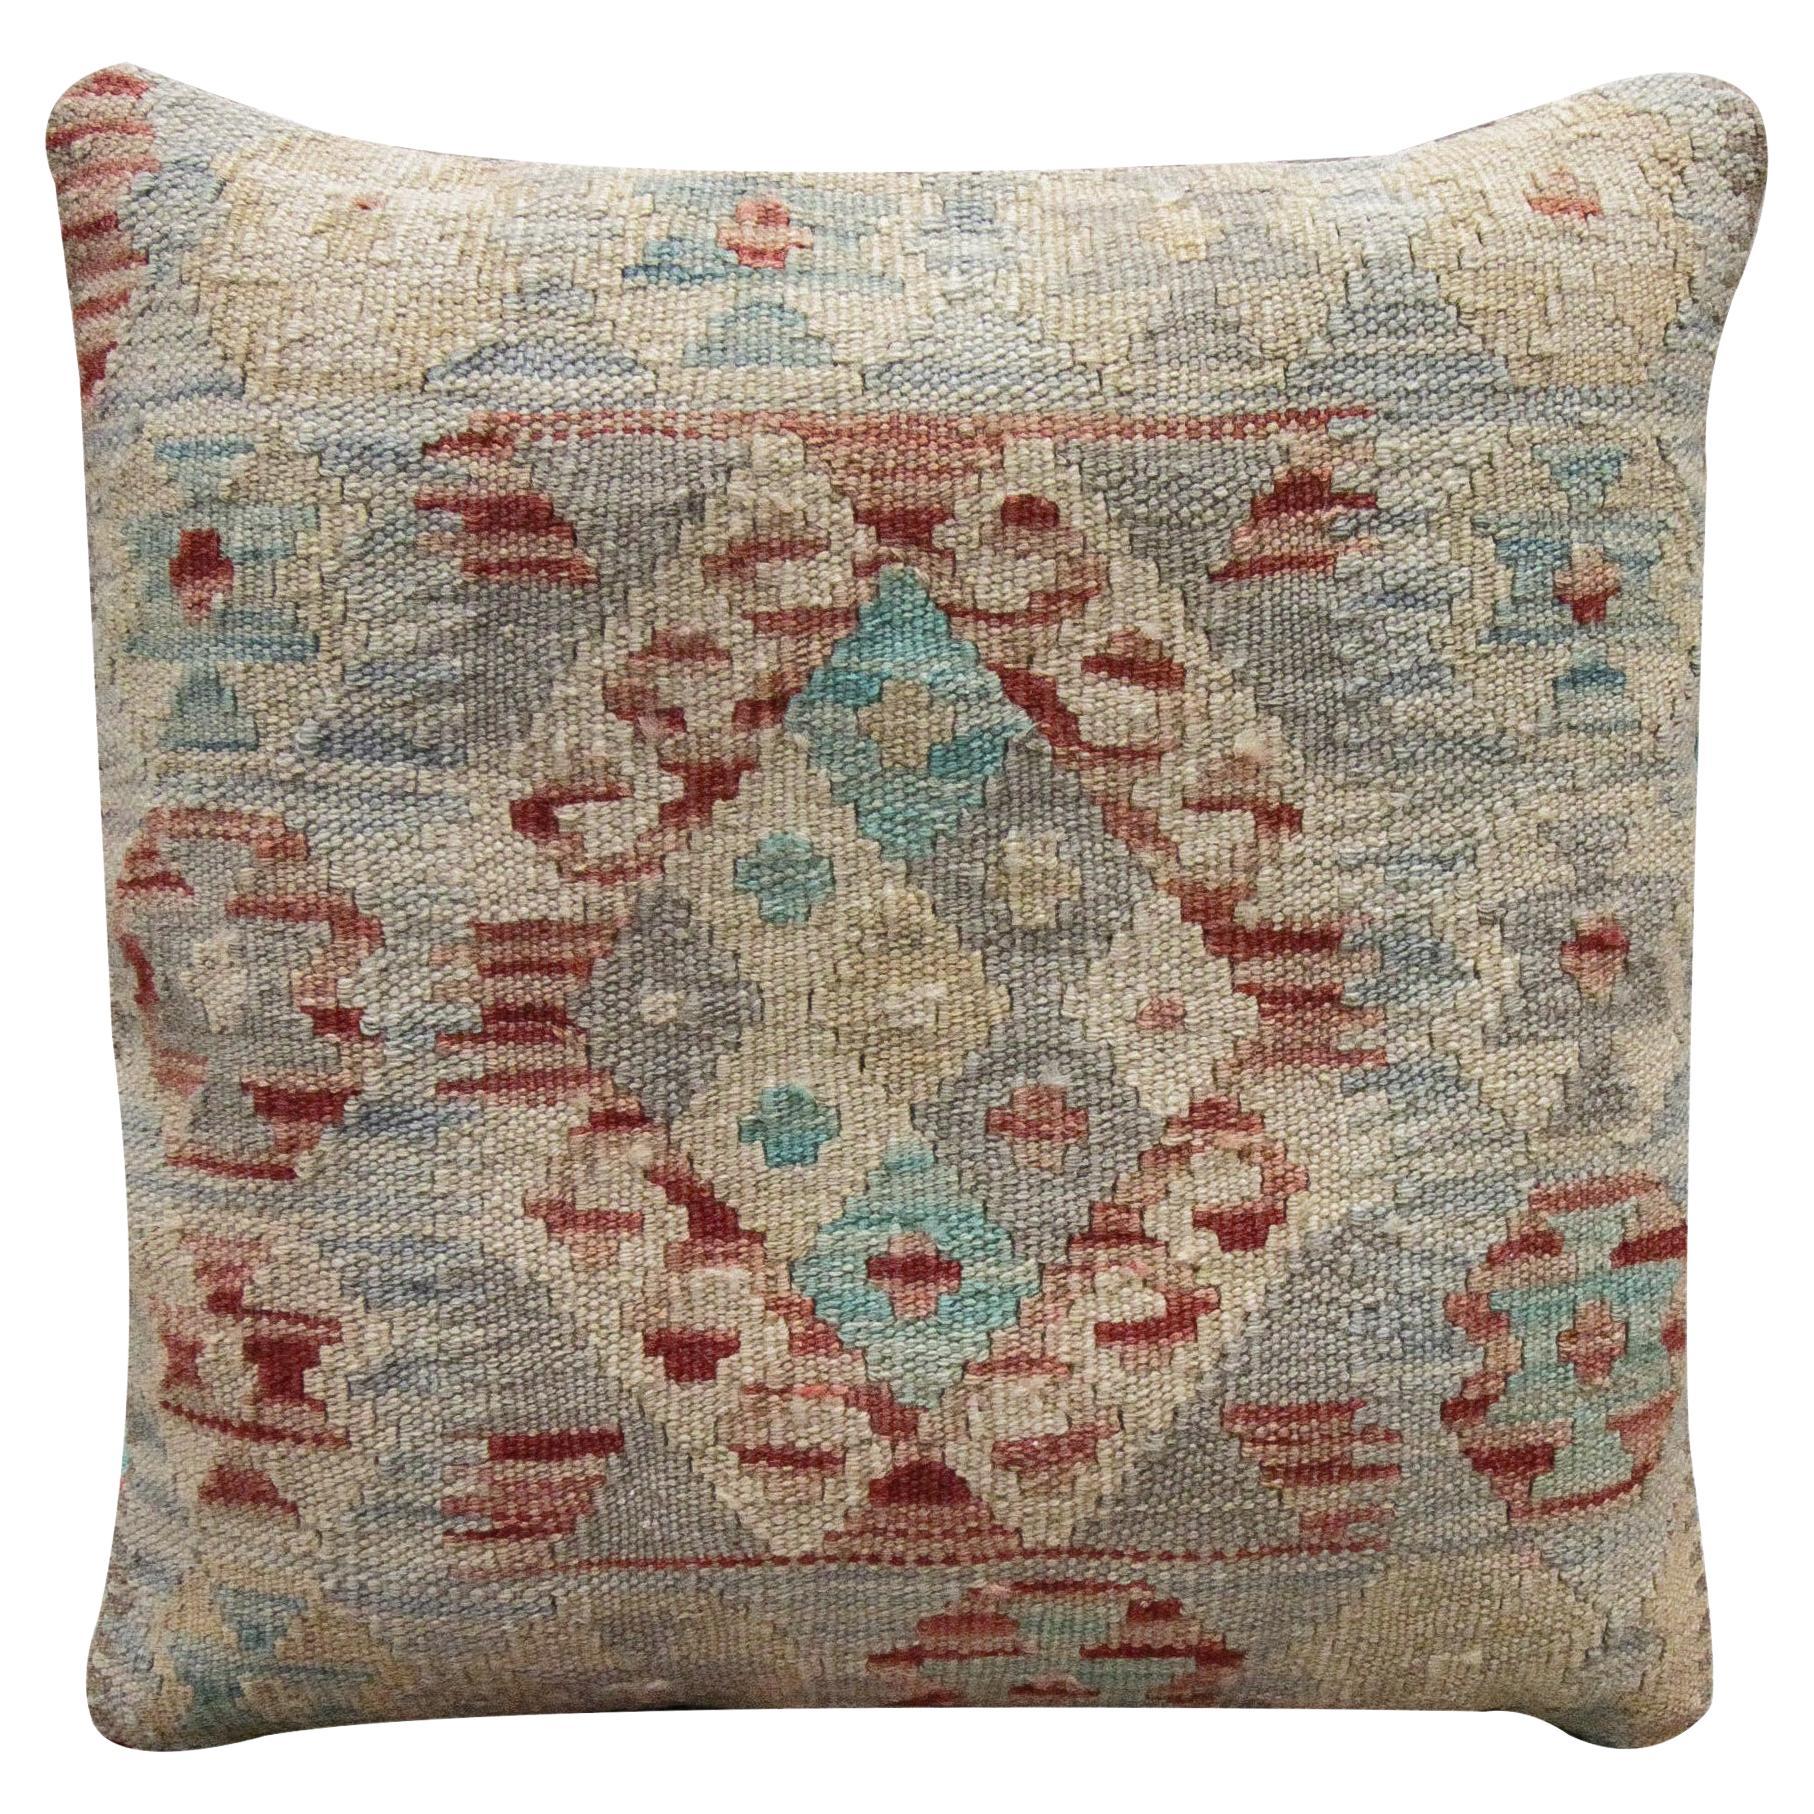 Rustic Kilim Cushion Cover Handwoven New Traditional Oriental Wool Pillow